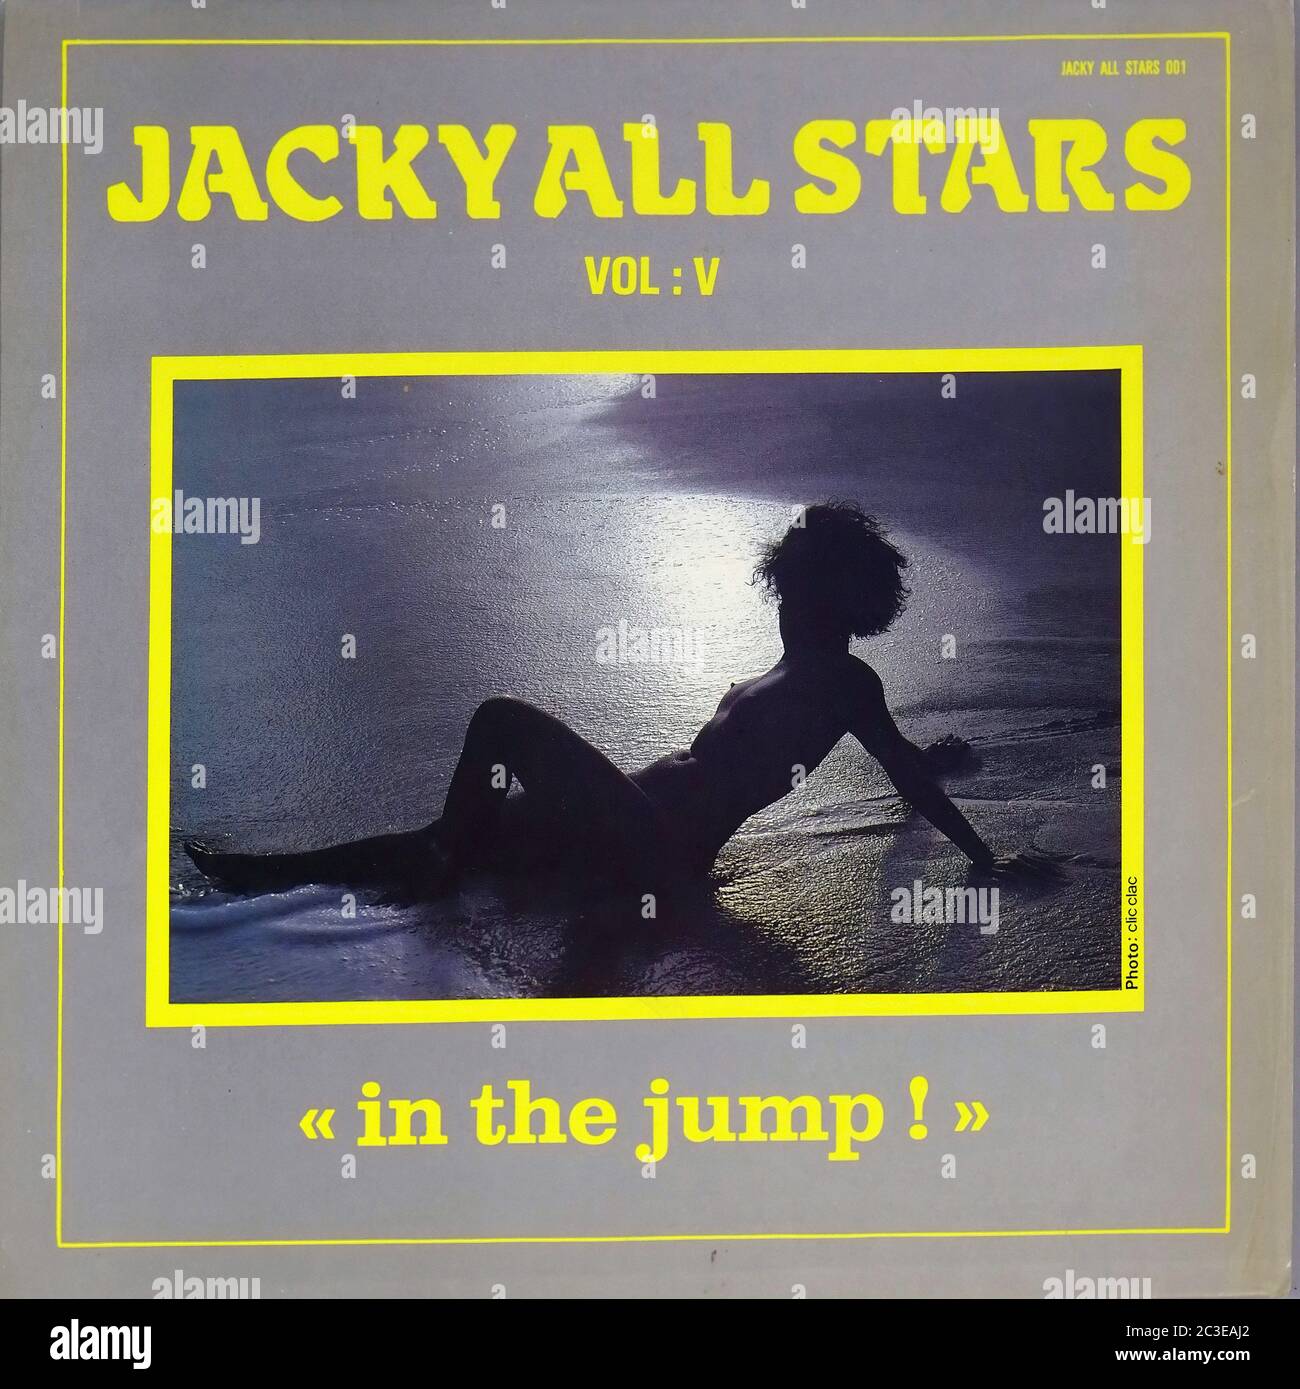 J.A.S JACKY ALL STARS VOL V 5 IN THE JUMP!  - Vintage 12'' LP vinyl Cover Stock Photo